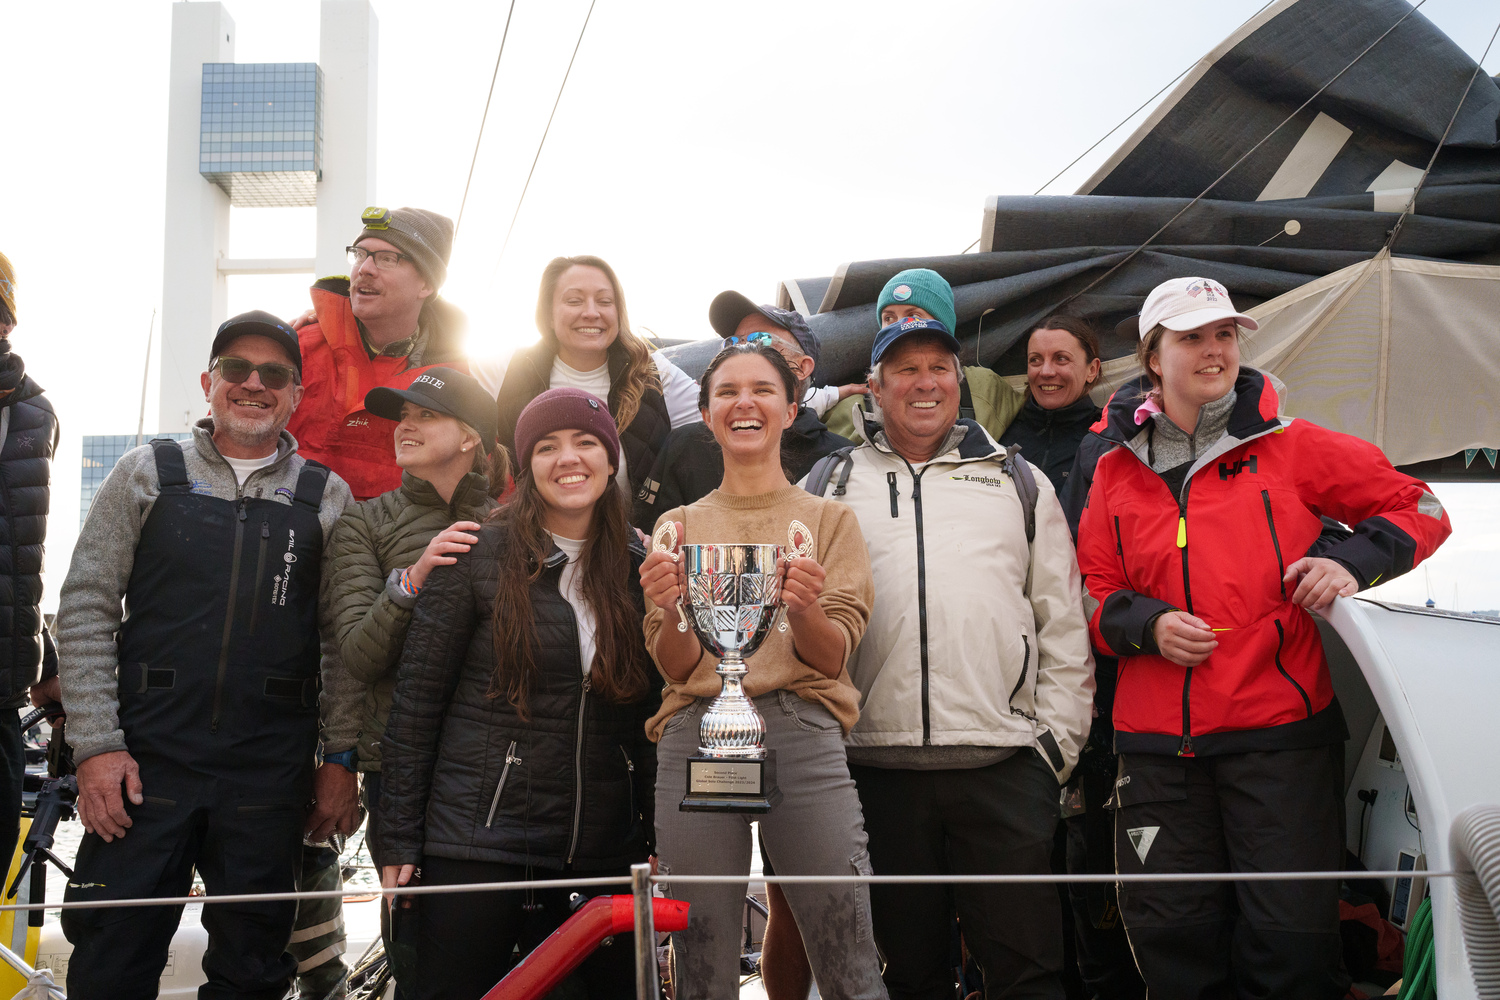 Cole Brauer hoists up her silver trophy for finishing second in the Global Solo Challenge. ALVARO SANCHIS